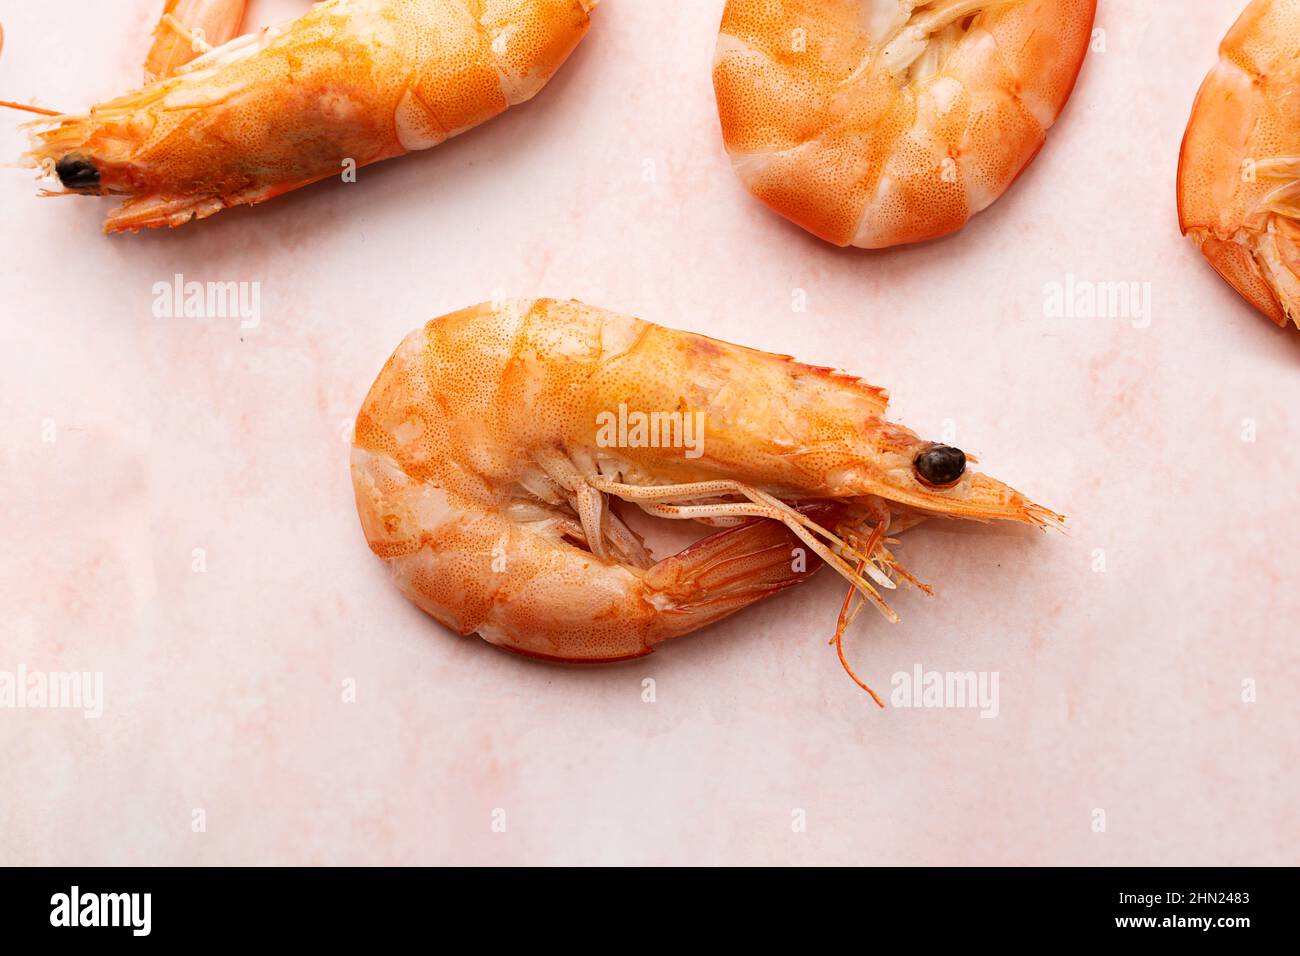 One boiled shrimp, cooked prawn on pink marble background, healthy seafood. Stock Photo